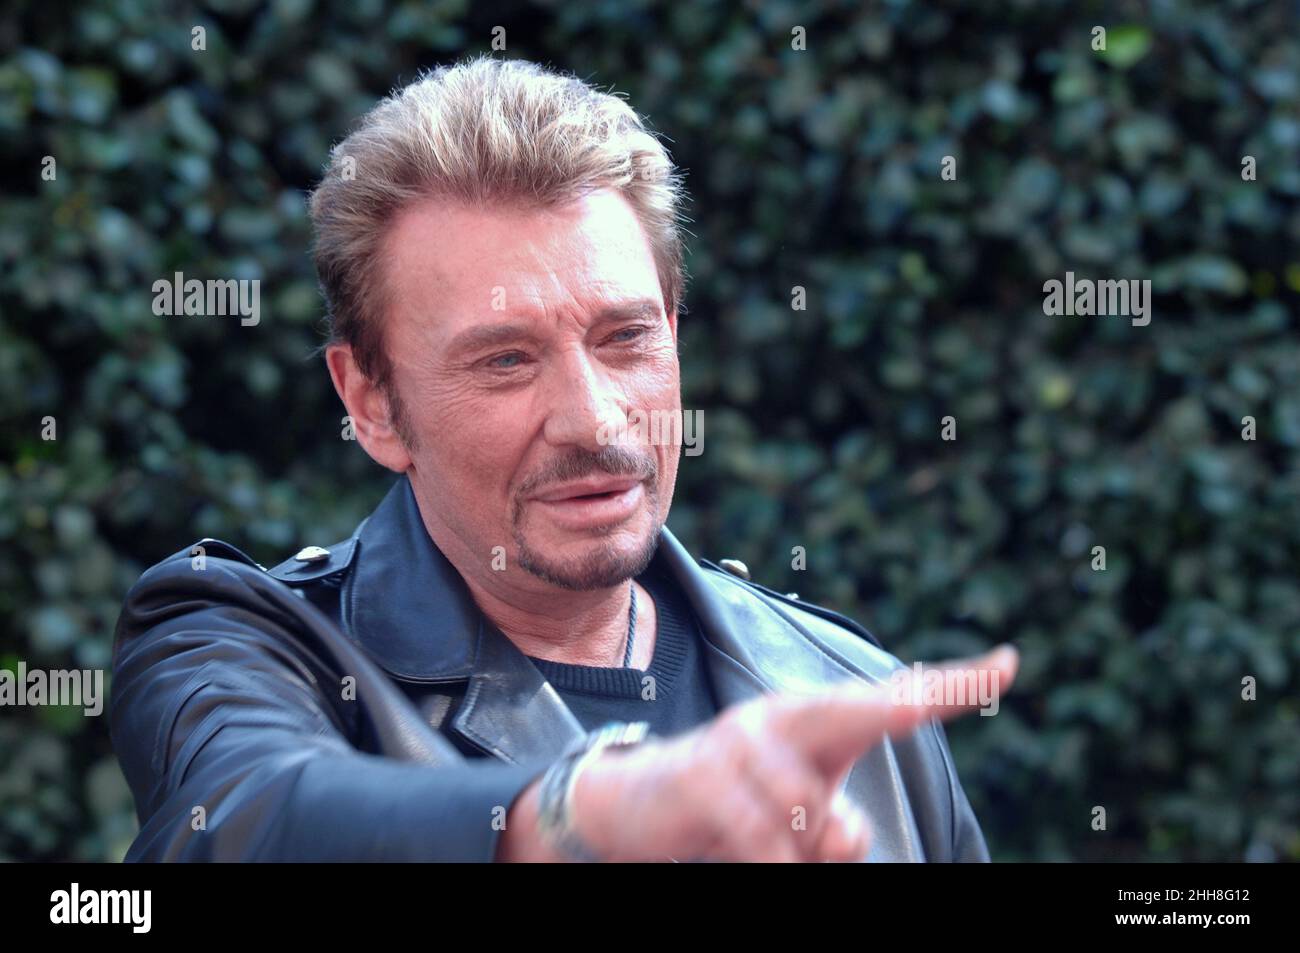 Milan Italy 2007-10-15 :  Johnny Hallyday during photo session at the Principe di Savoia Hotel Stock Photo